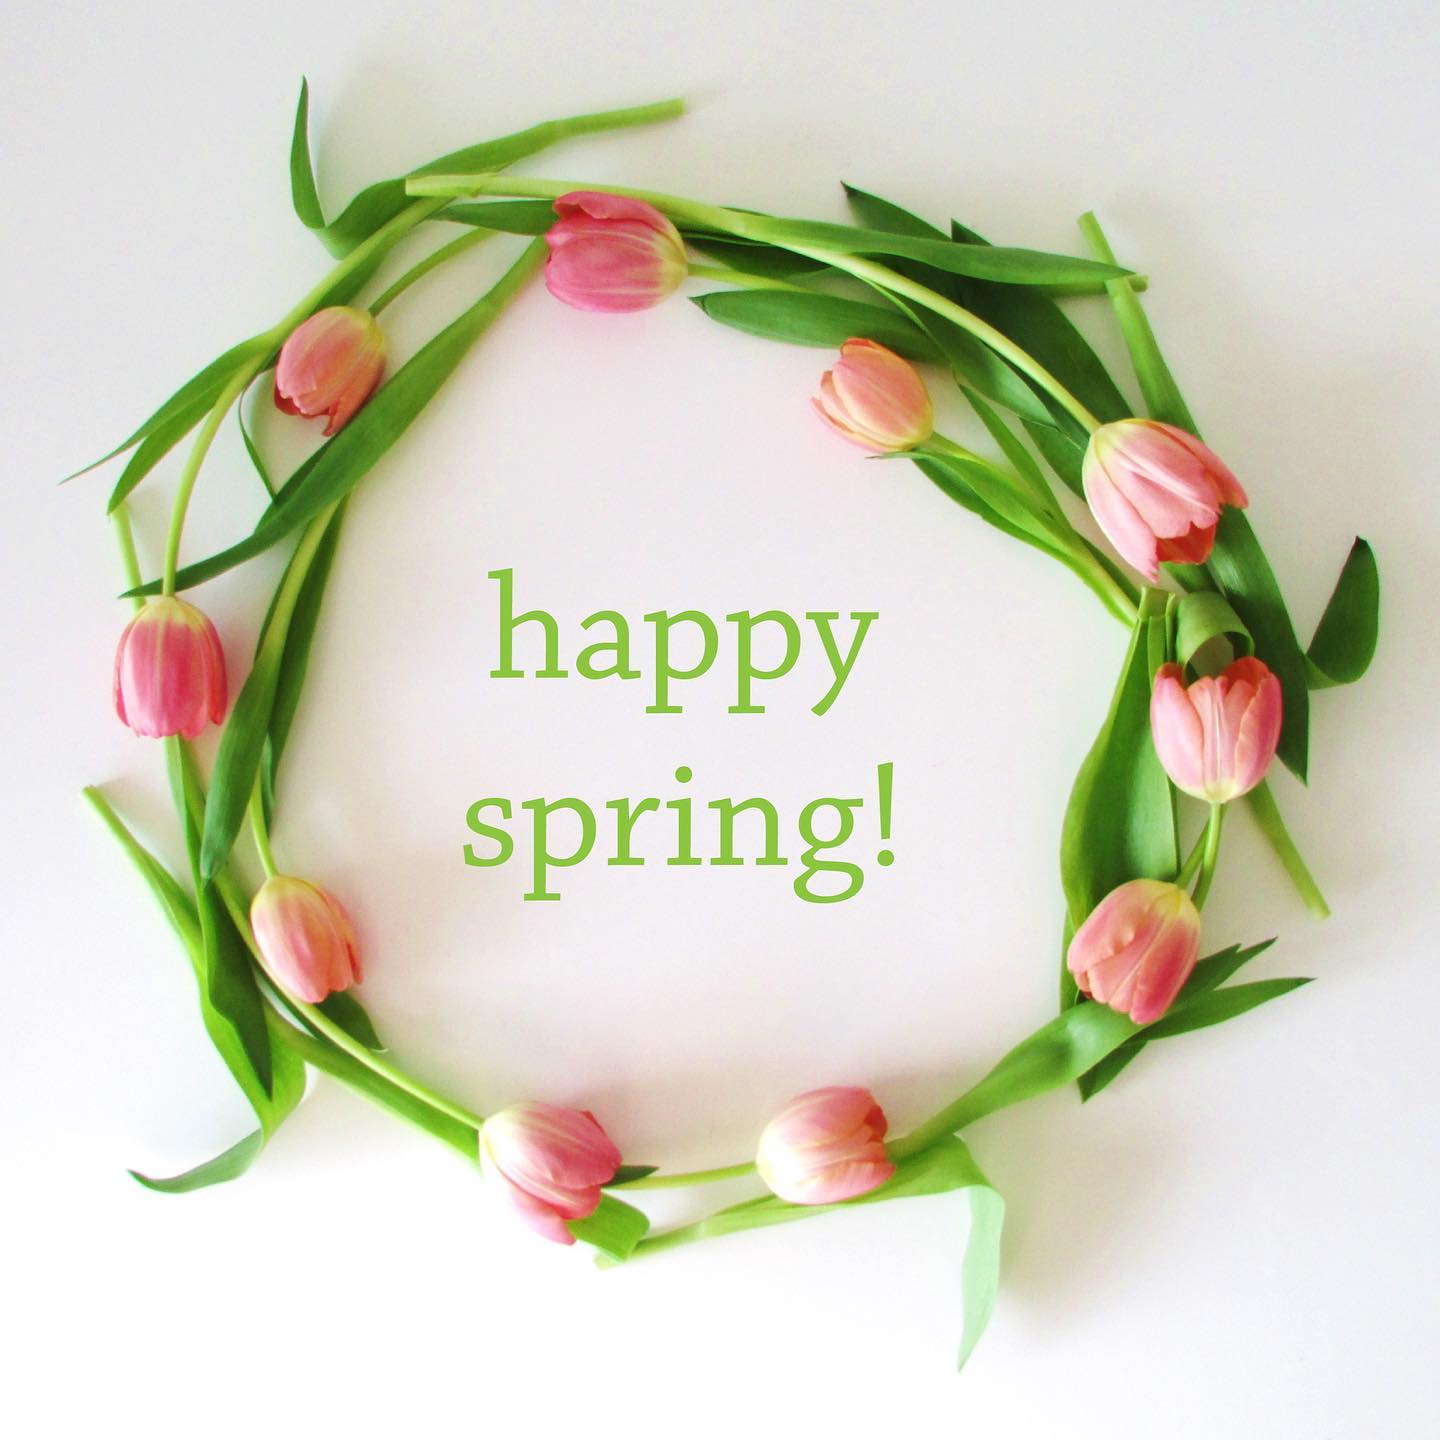 Happy first day of spring!... Manor House Builders